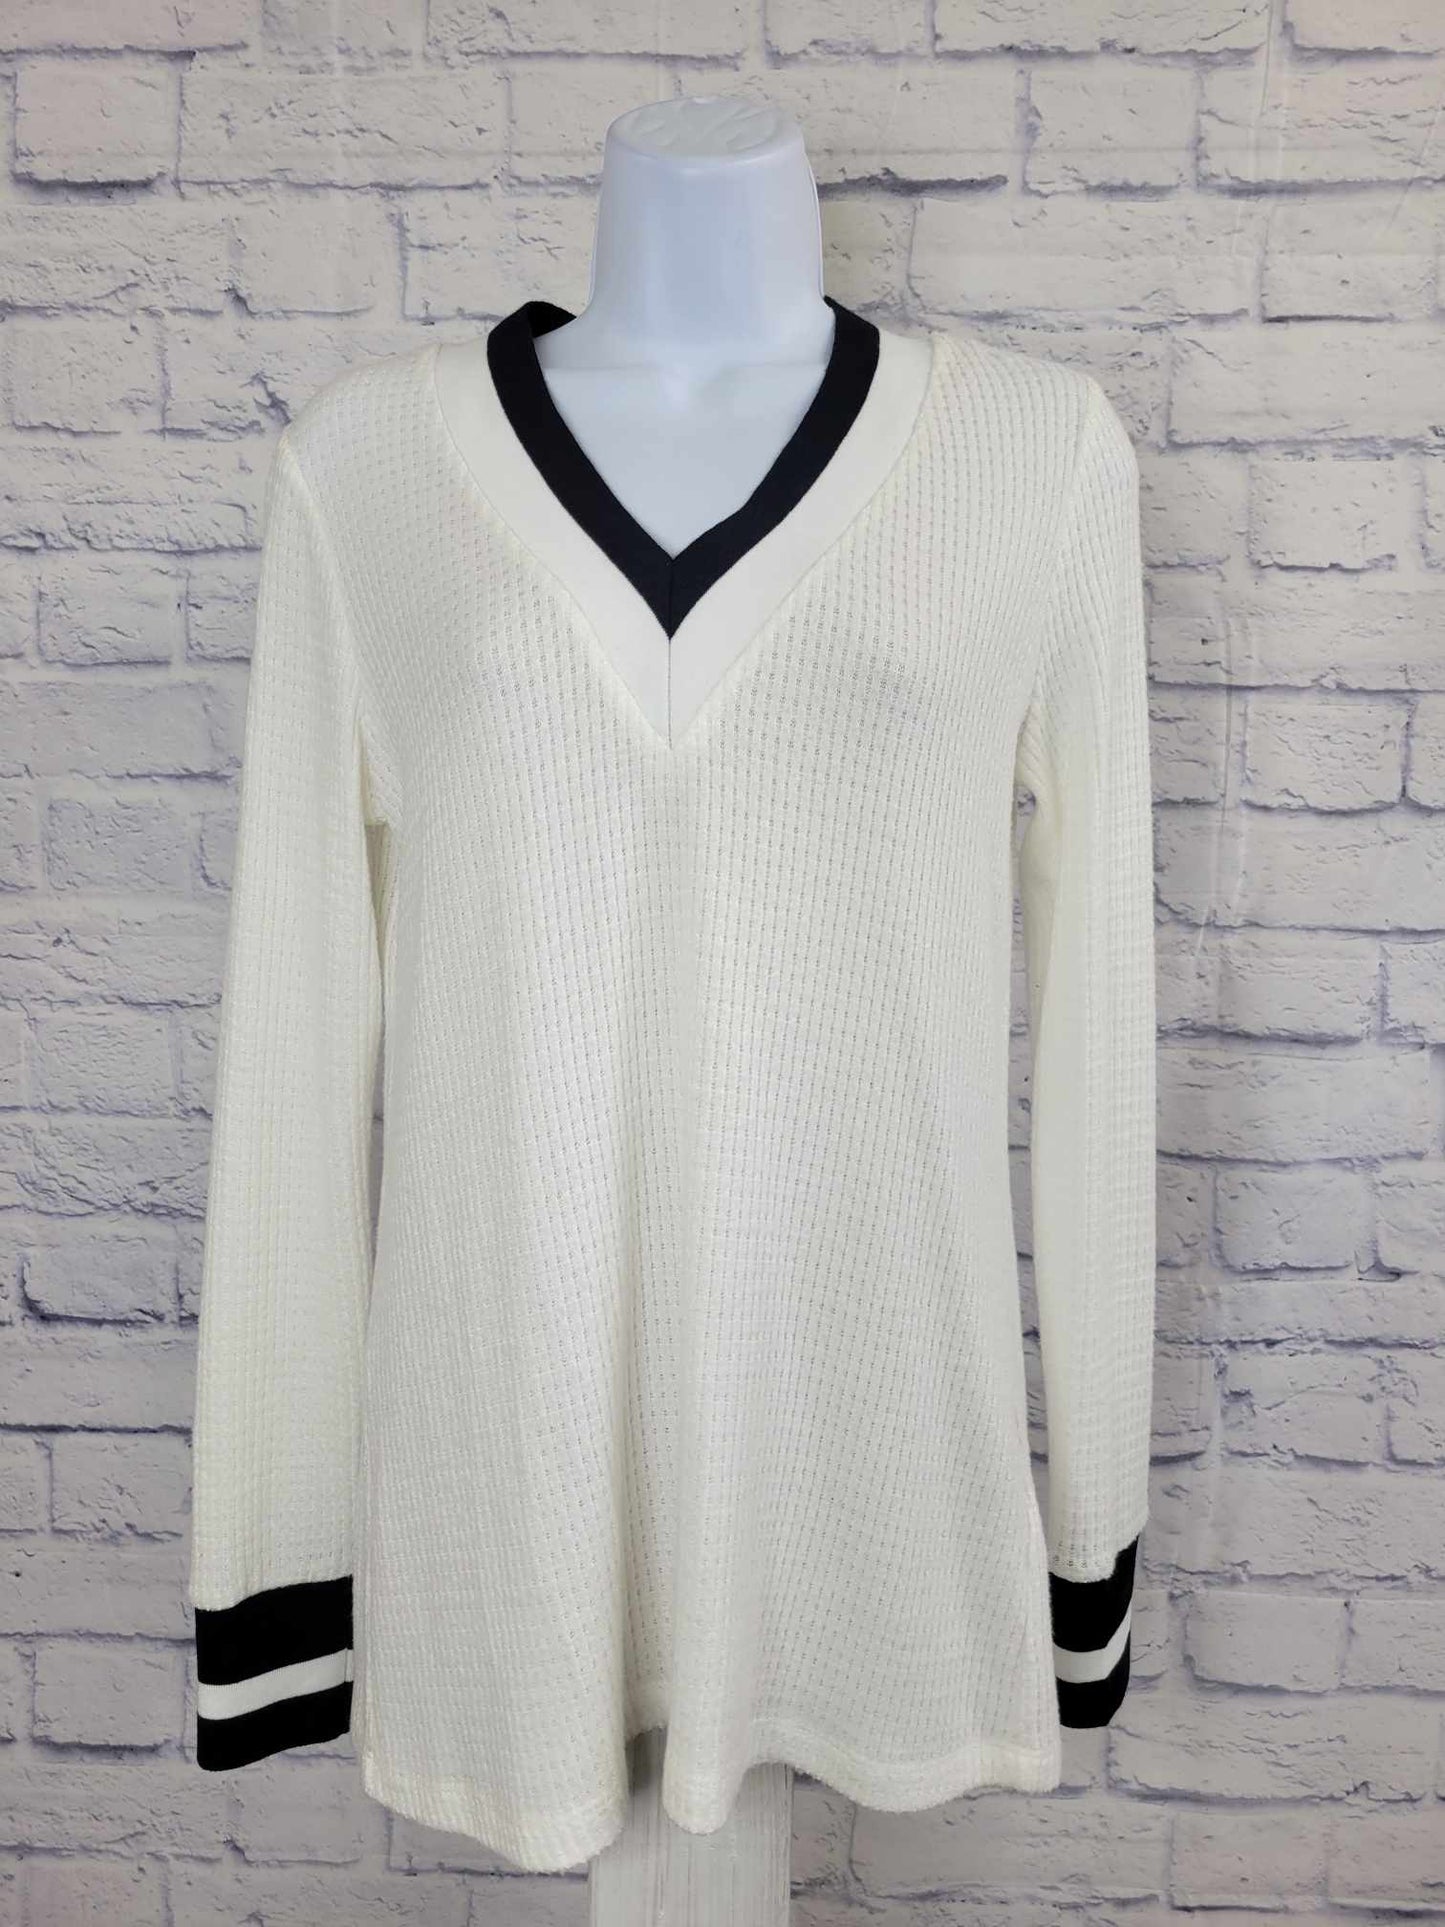 SMALL IVORY A467189 Susan Graver Weekend Brushed Waffle Knit Top w/Striped Rib Trim